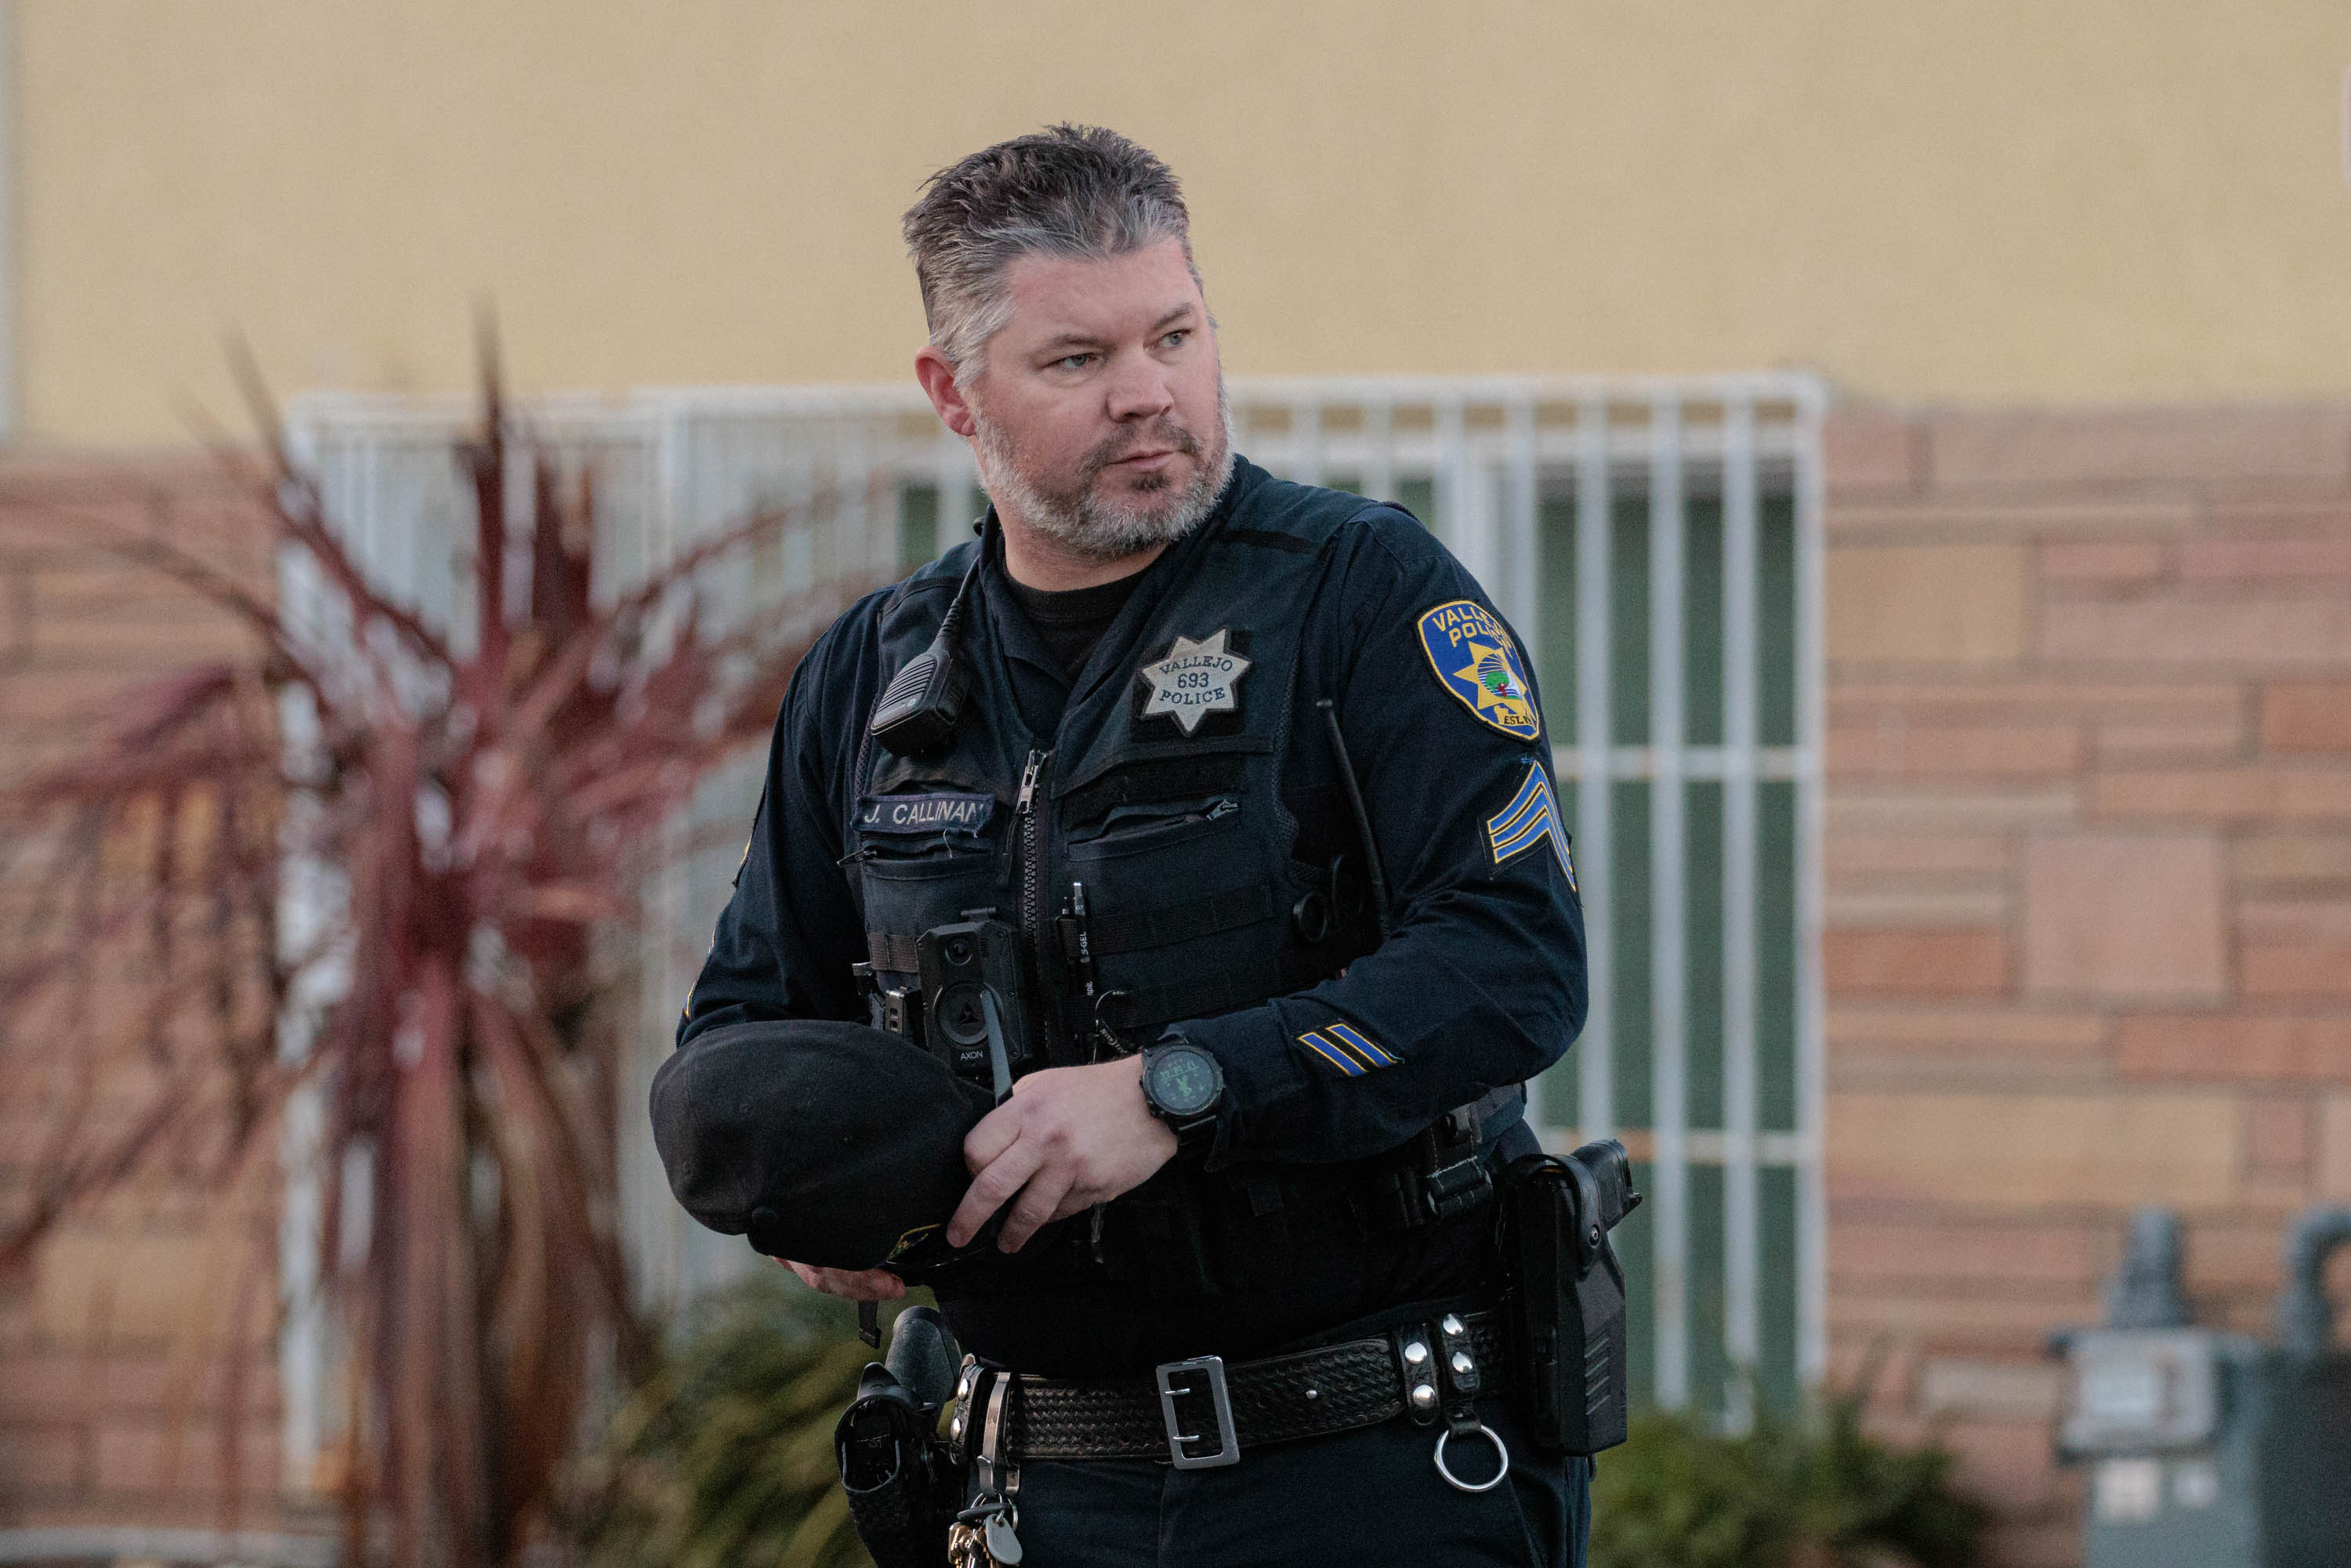 A police officer in a tactical uniform, equipped with a badge, body camera, and various gear, stands alert in an urban environment. His expression is serious and focused. The backdrop features a light-colored building and a decorative plant, emphasizing the contrast between the officer's dark uniform and the surroundings.